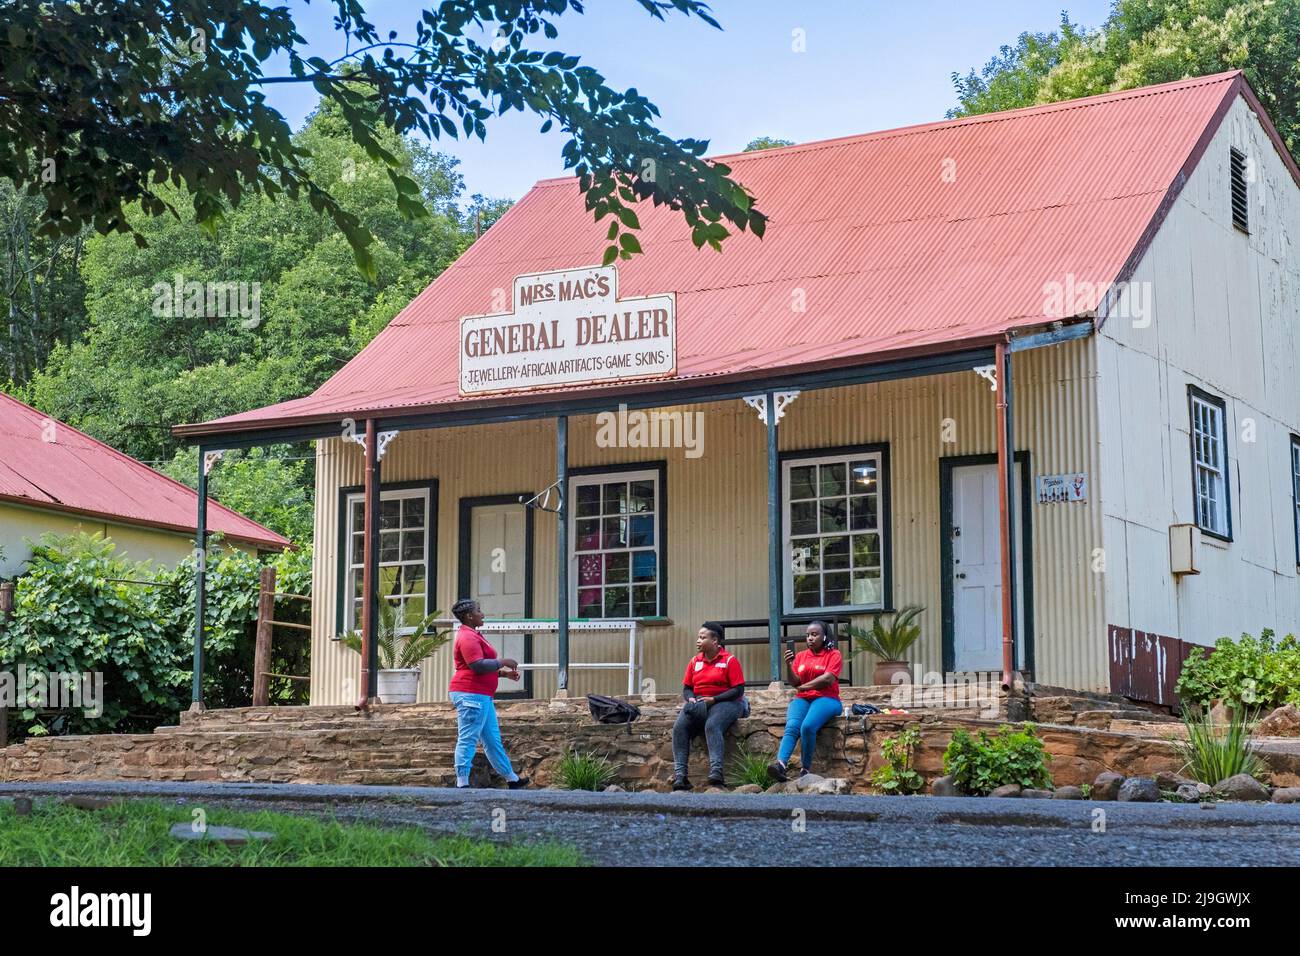 Mrs. Mac's General Dealer at the historic mining town Pilgrim's Rest / Pelgrimsrus, now small museum town in the Mpumalanga province, South Africa Stock Photo